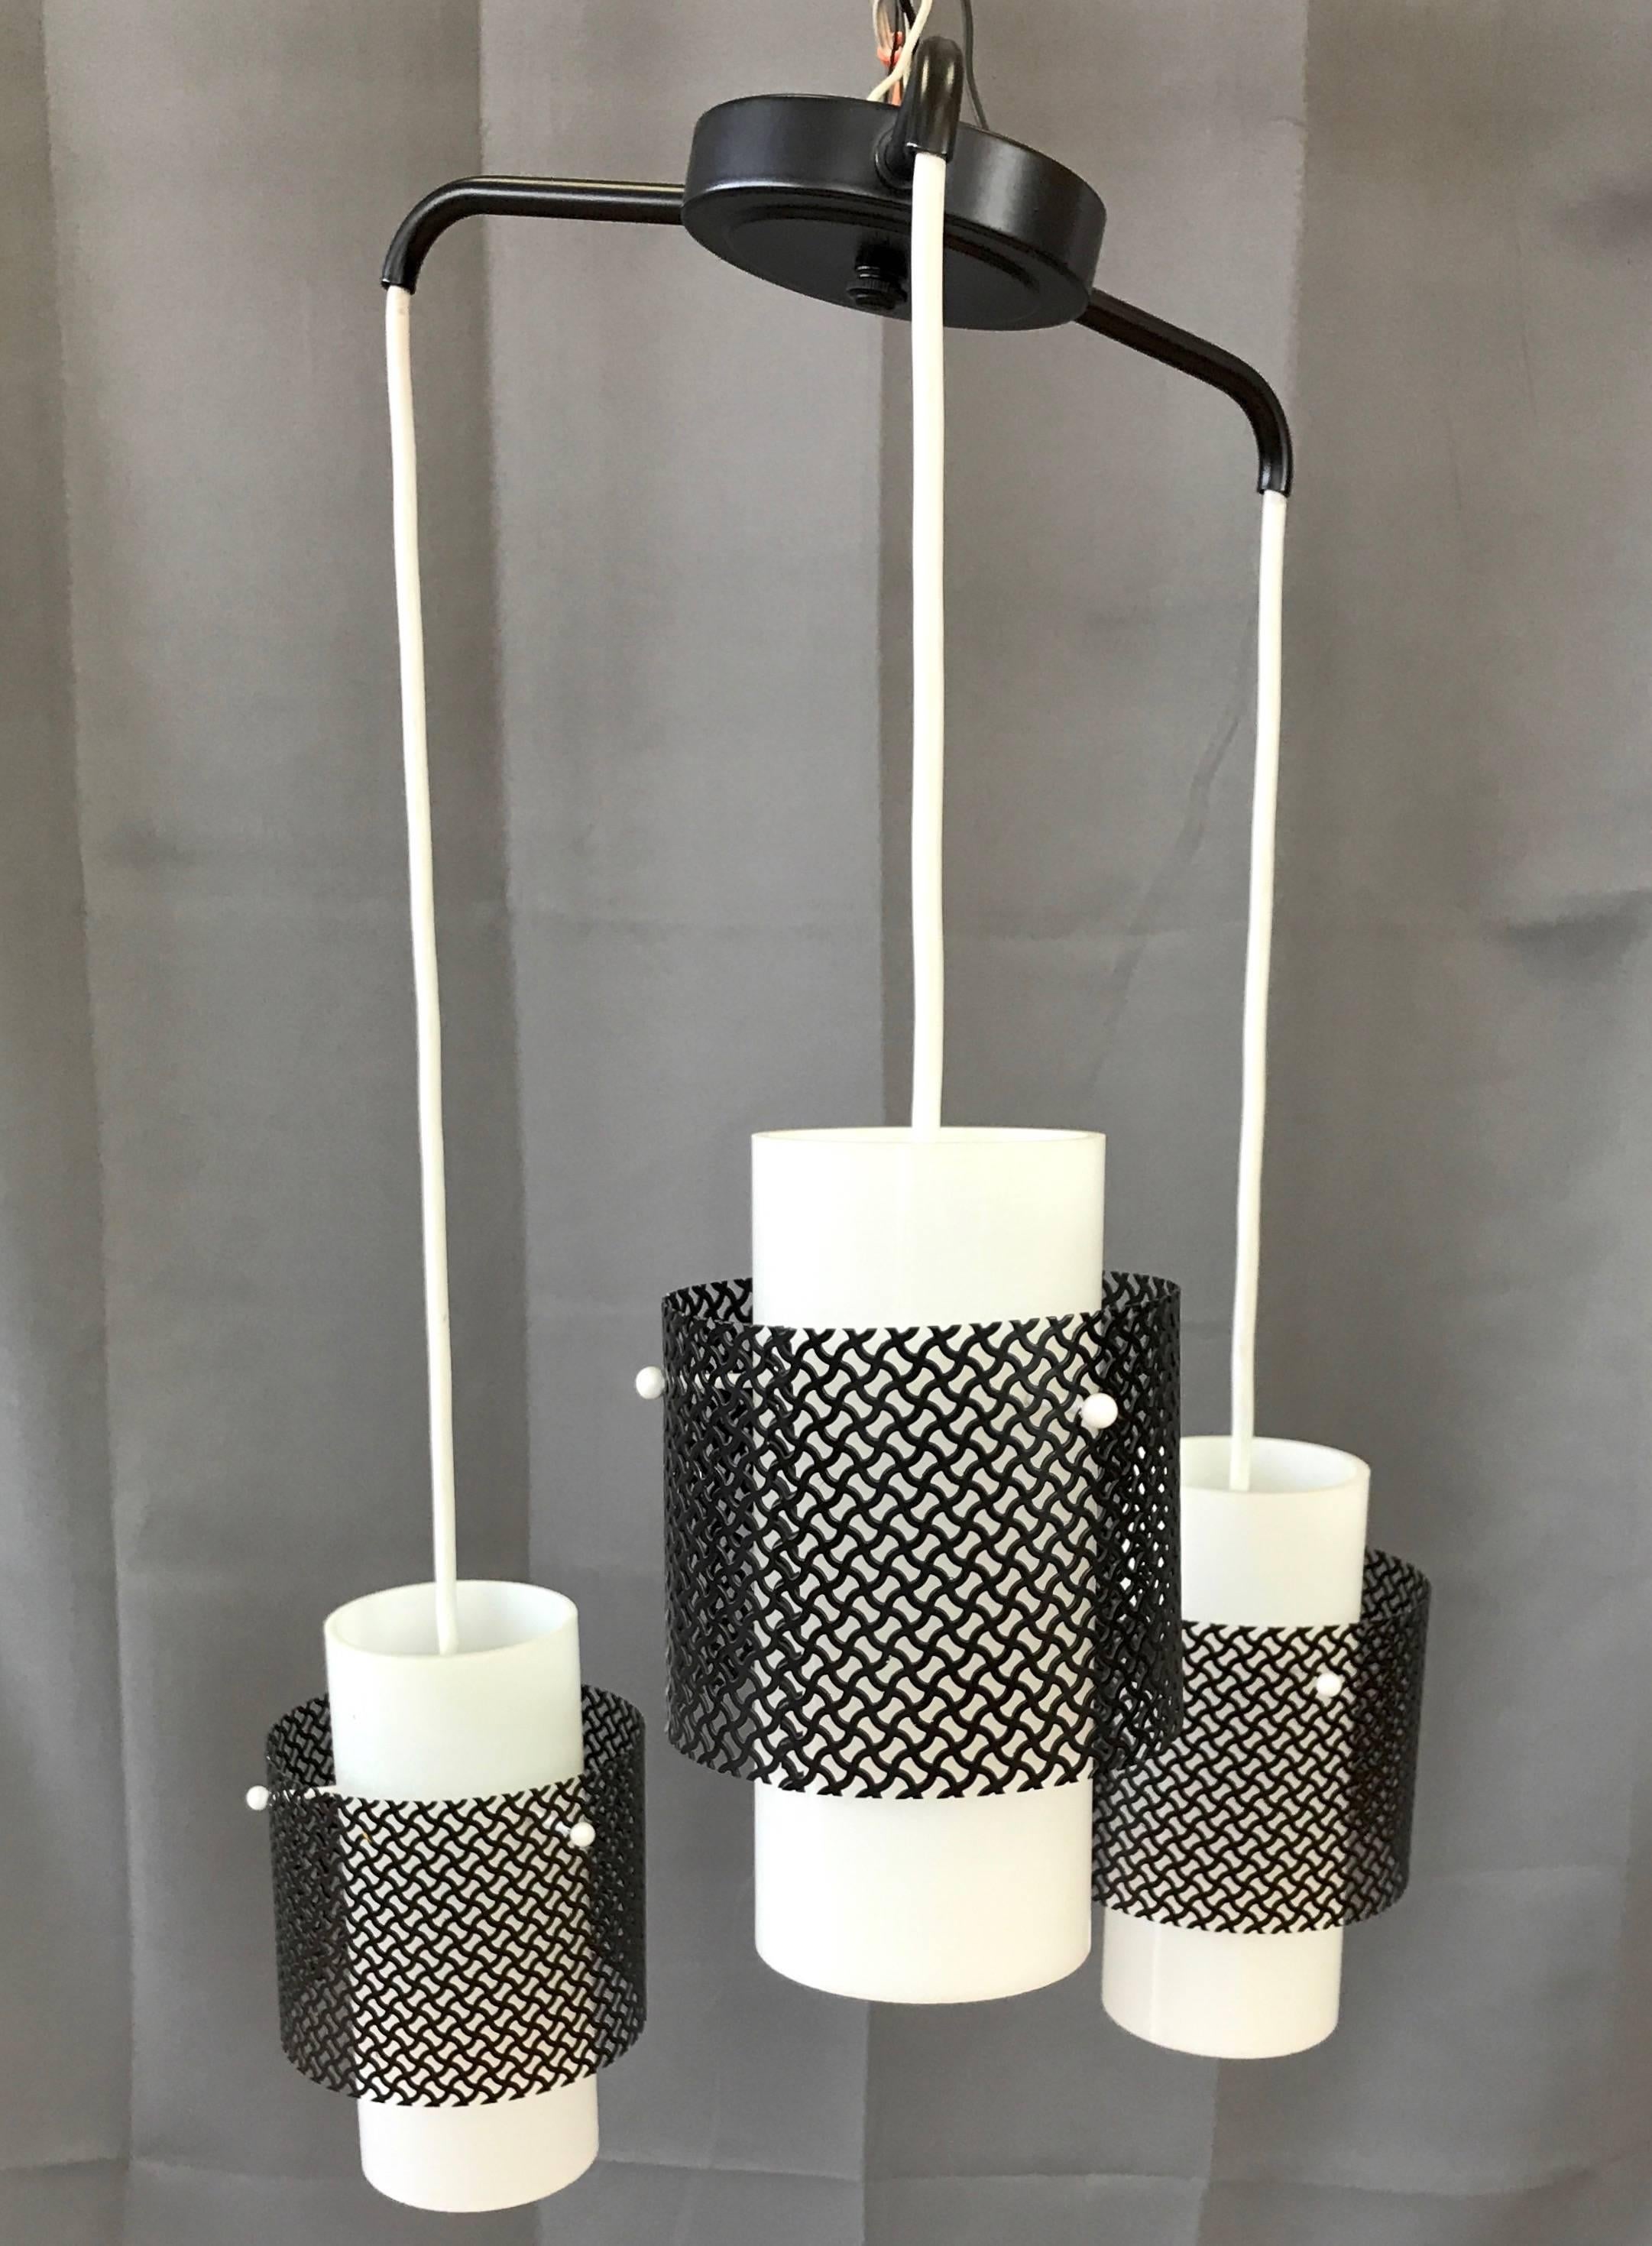 A sharp looking Mid-Century Modern three-light ceiling fixture with glass shades and metal diffusers.

Milk white cylindrical glass shades hang in a staggered arrangement from outstretched black enameled metal arms. Each shade is pierced and